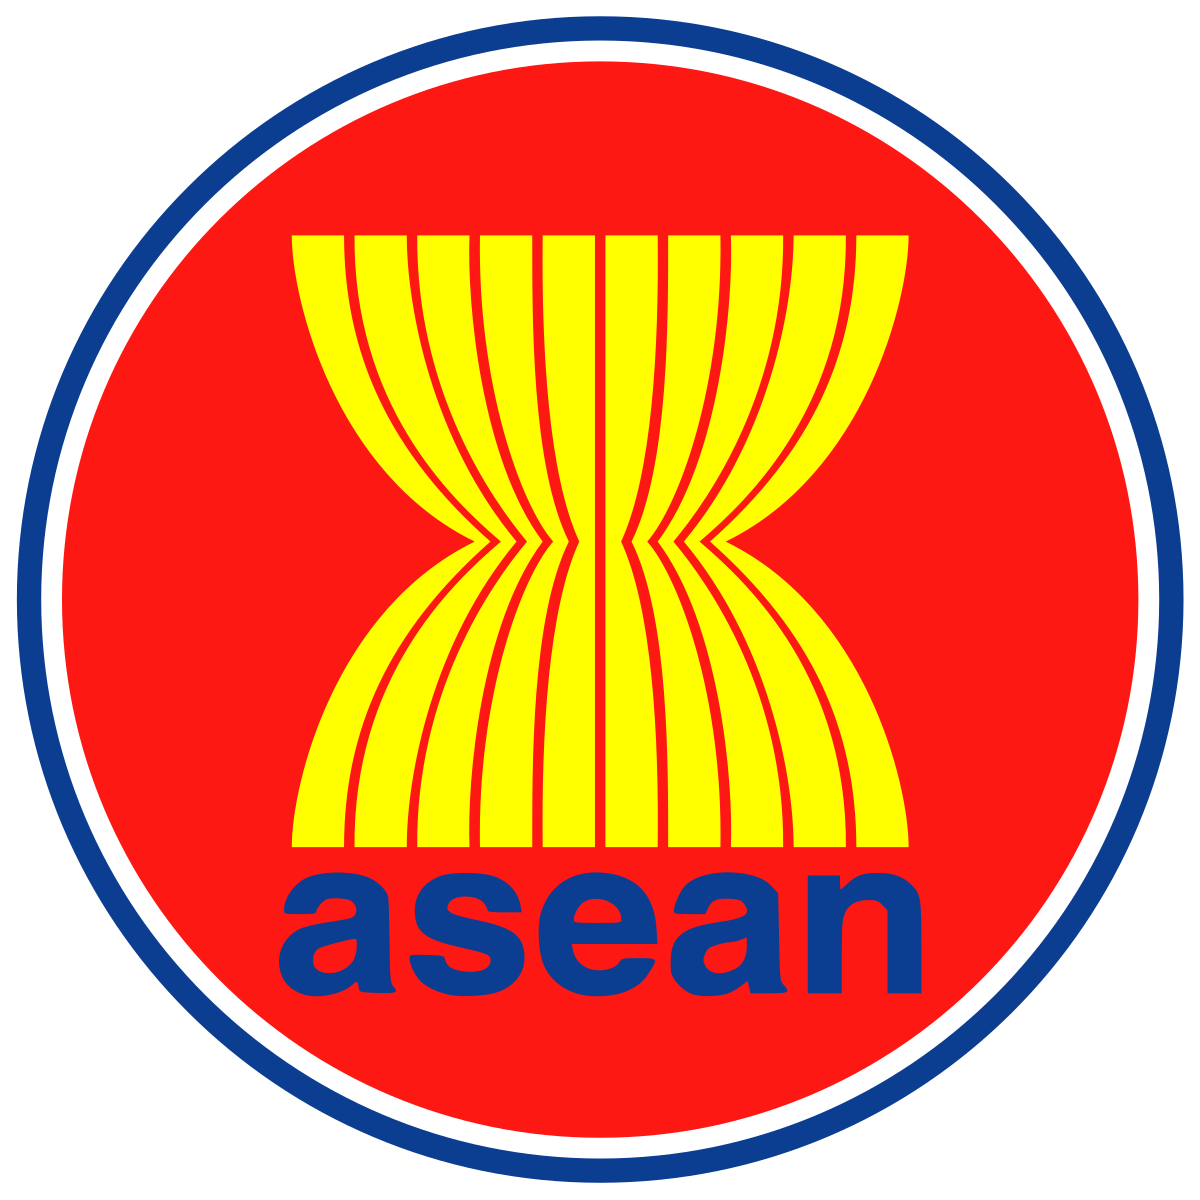 ASEAN logo, a red circle with a white and blue border with a yellow hourglass in the middle.